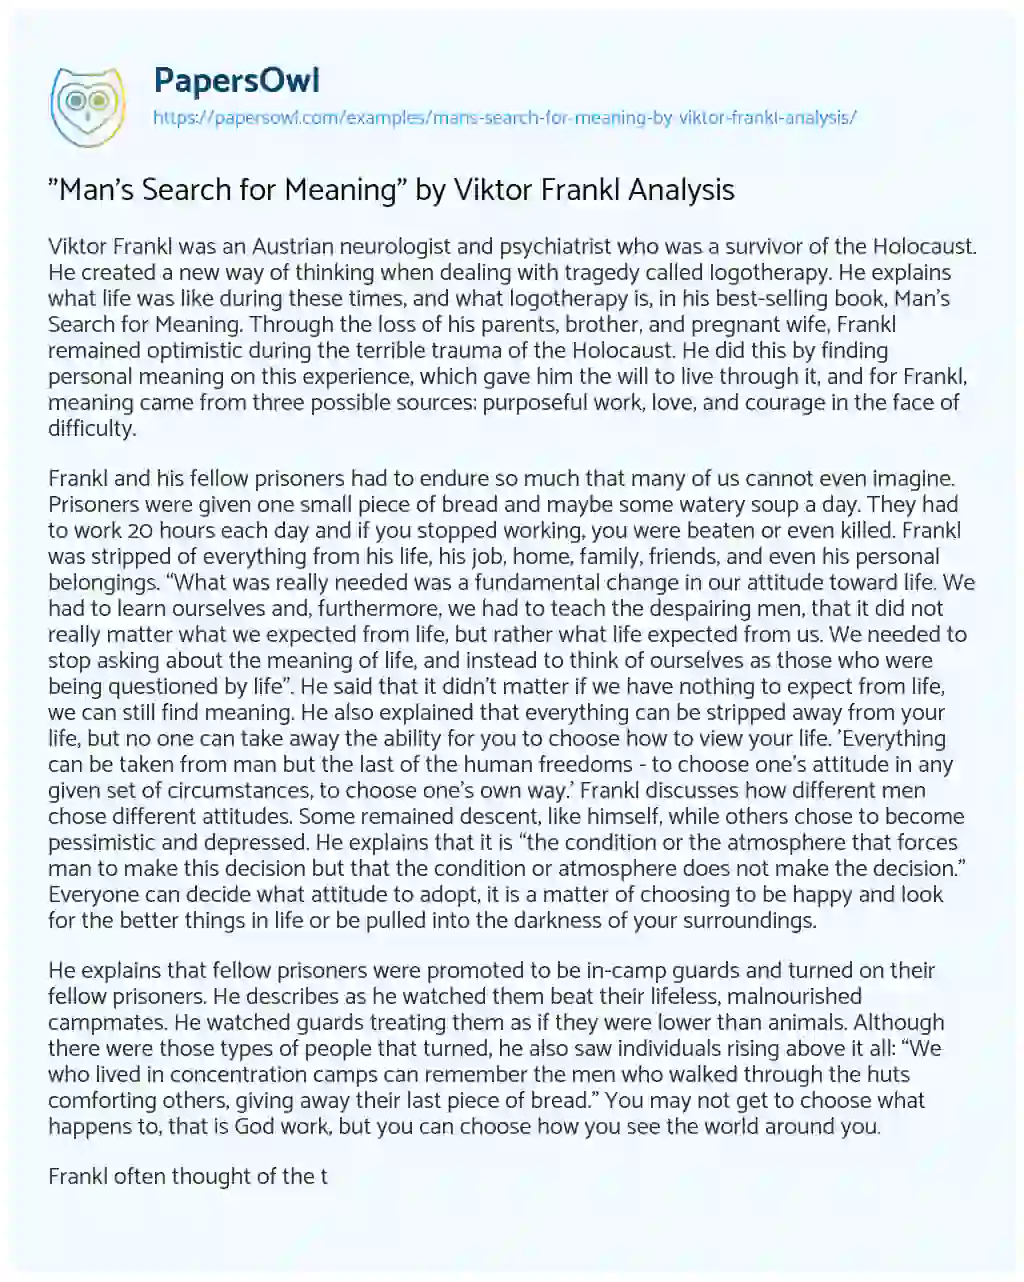 Essay on “Man’s Search for Meaning” by Viktor Frankl Analysis